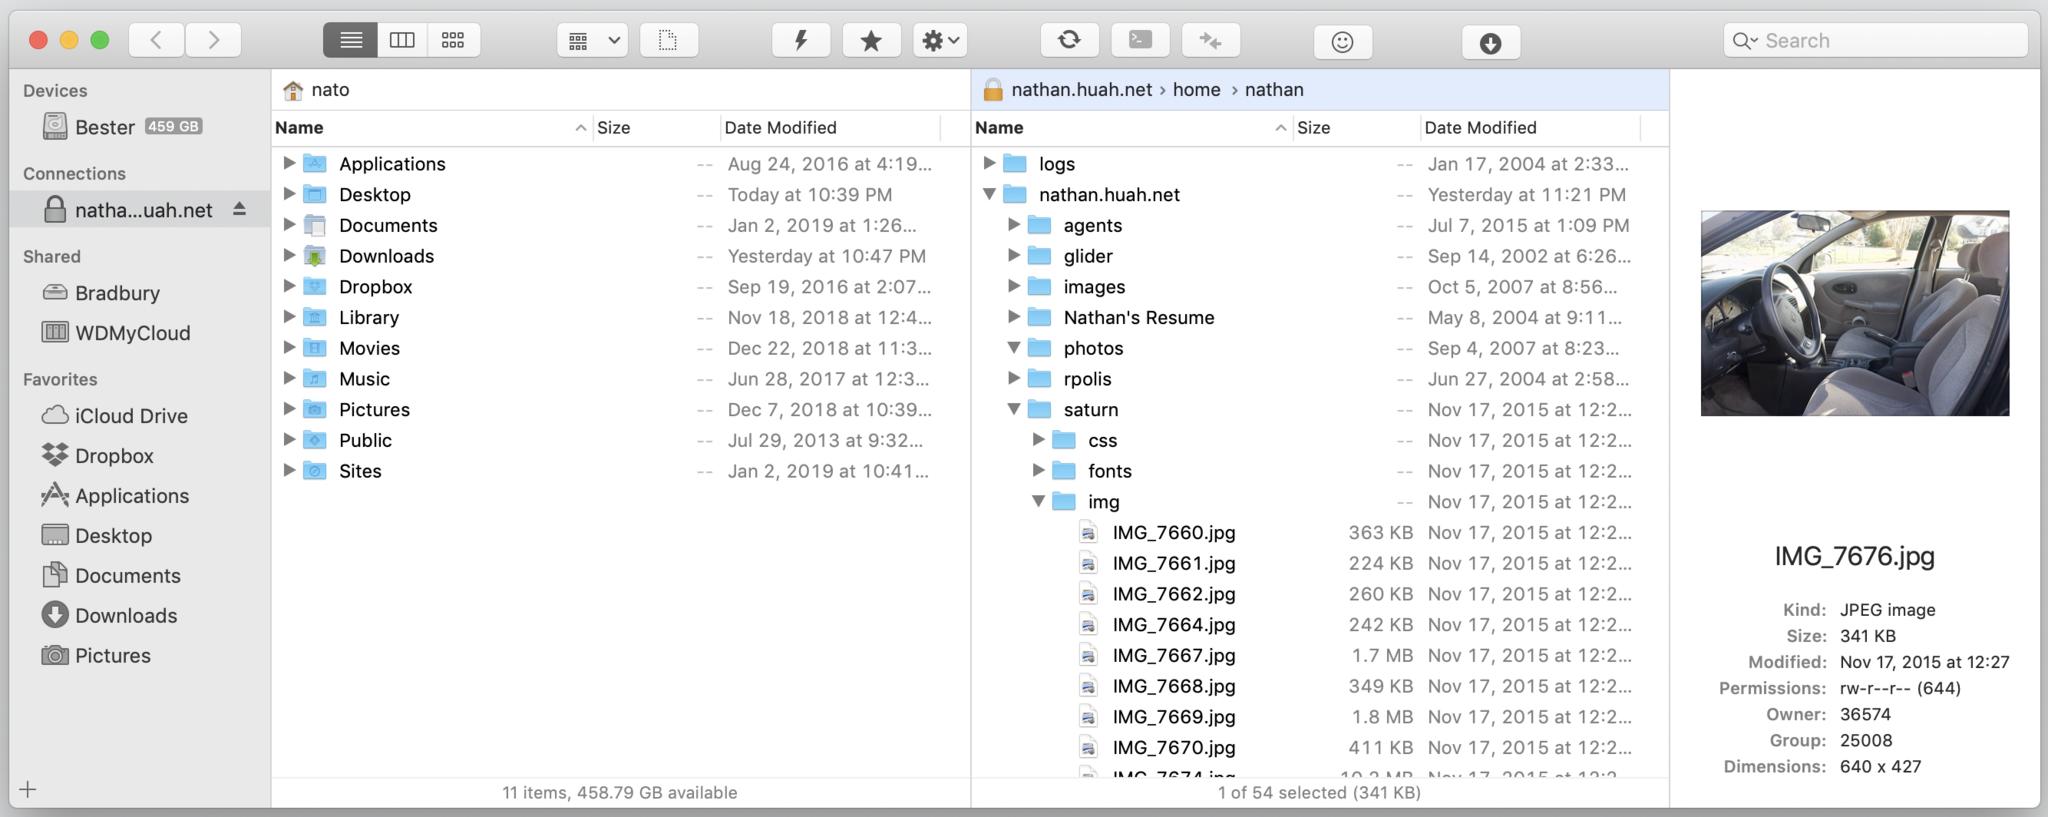 File Transfer Apps For Mac In 2019 The Good The Bad And The Ugly Imore